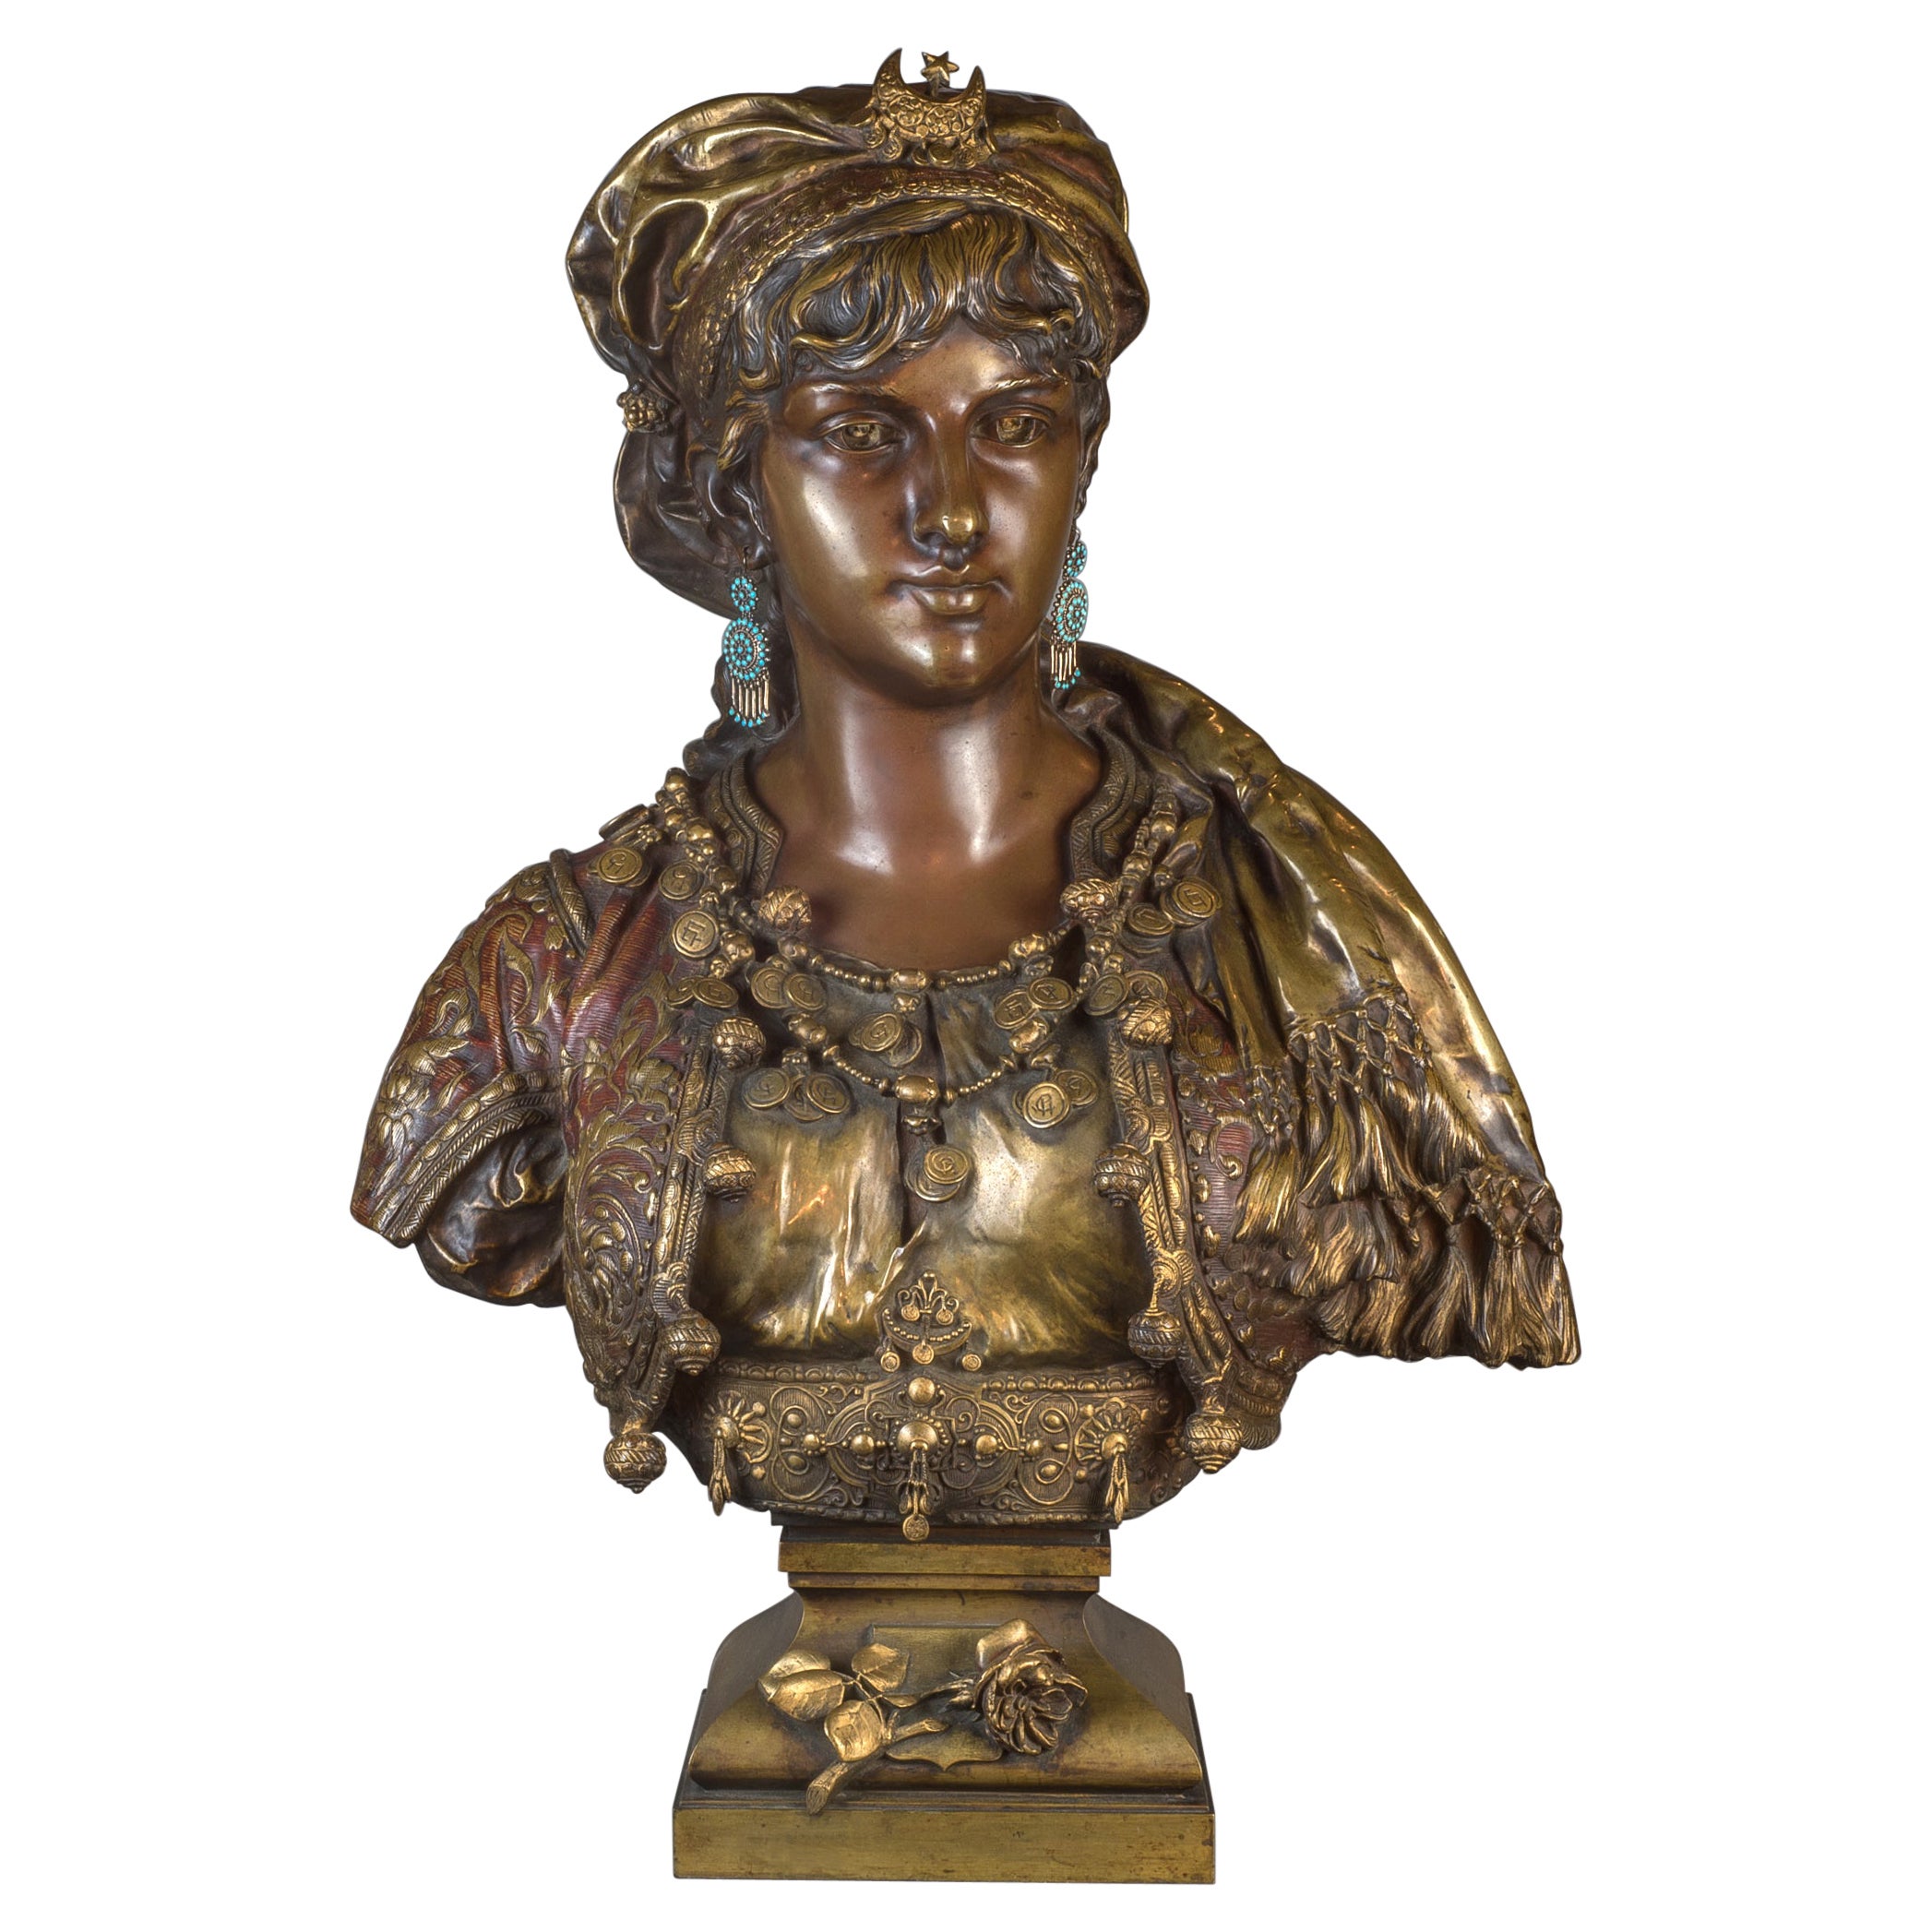  Polychrome-Patinated Bronze Bust by A. Gaudez